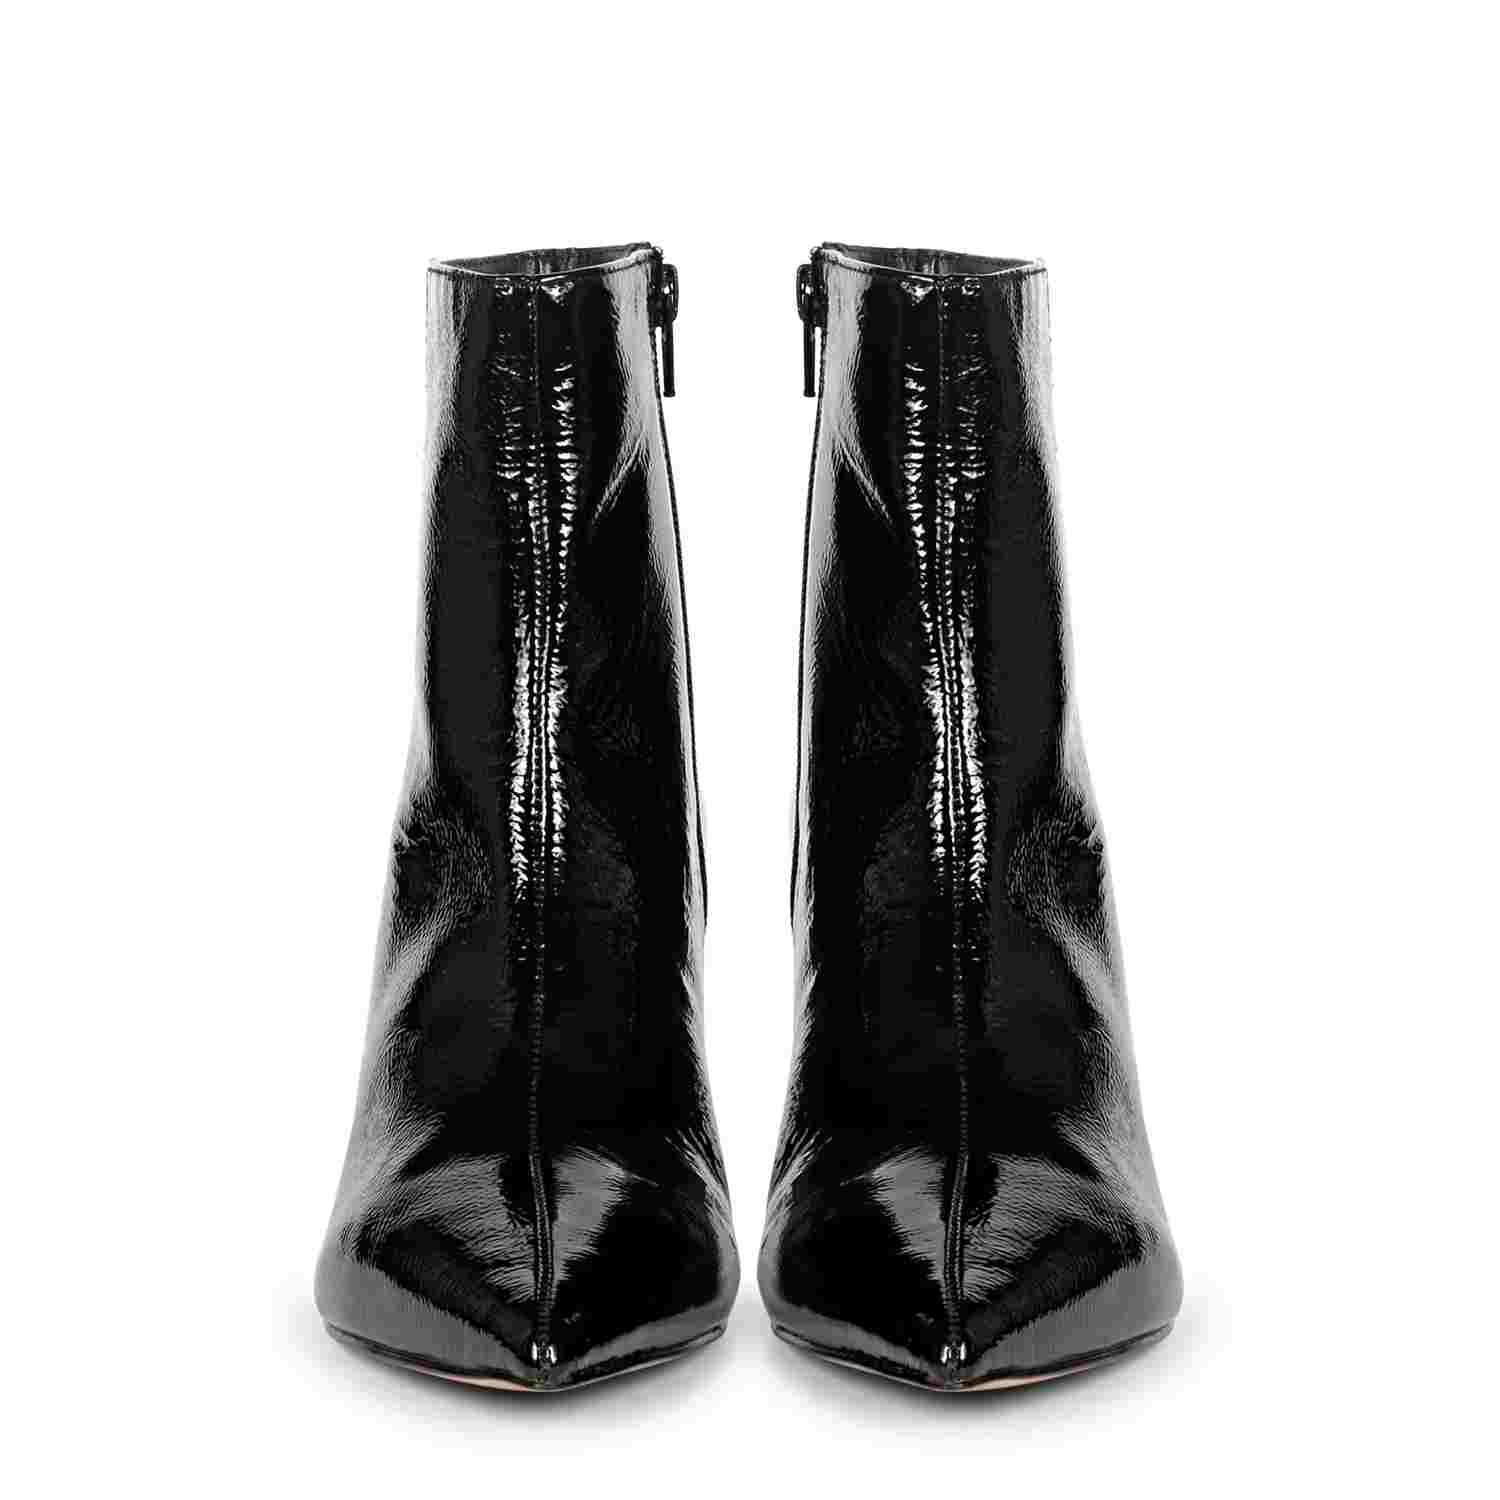 20Cm7.87In High Heels Sexy Boots Black Patent India | Ubuy